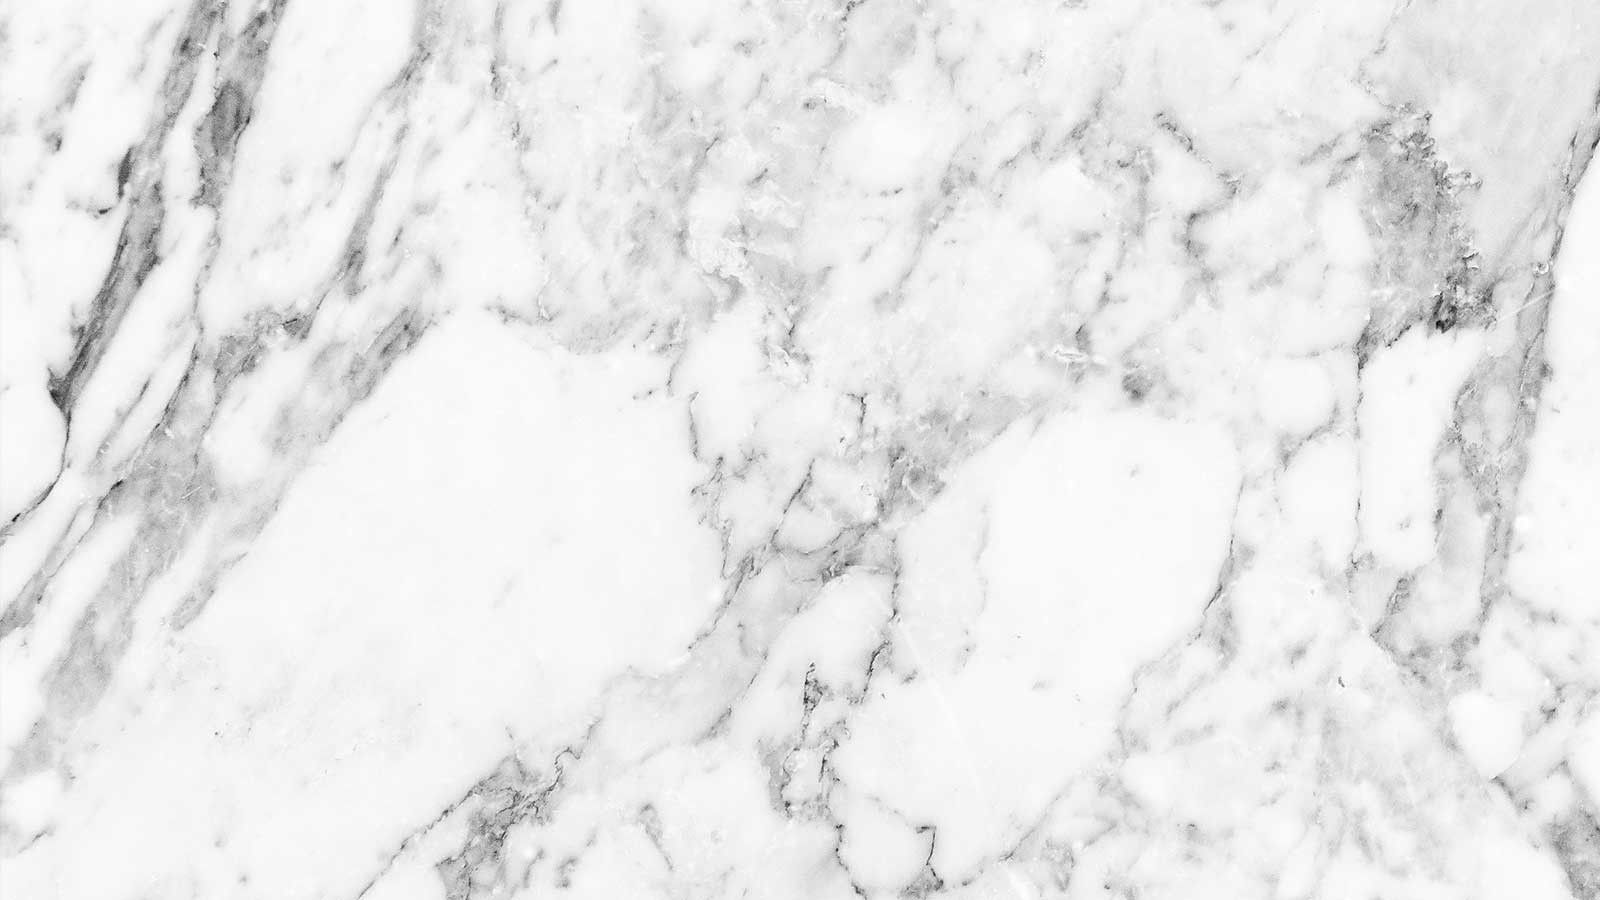 A white and grey marble surface with a lot of纹理. - White